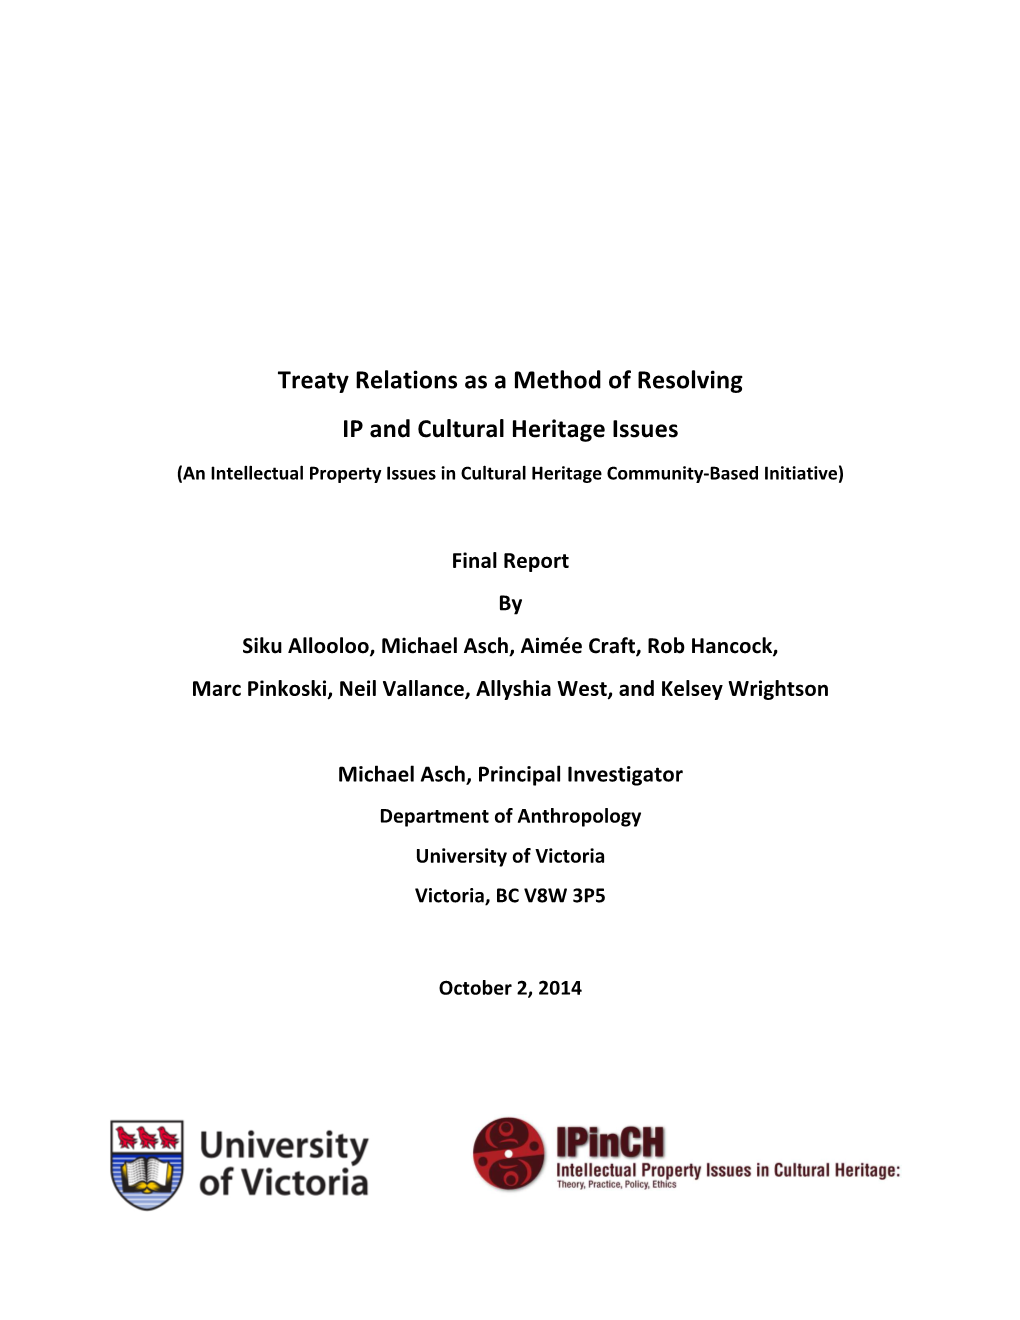 Treaty Relations As a Method of Resolving IP and Cultural Heritage Issues